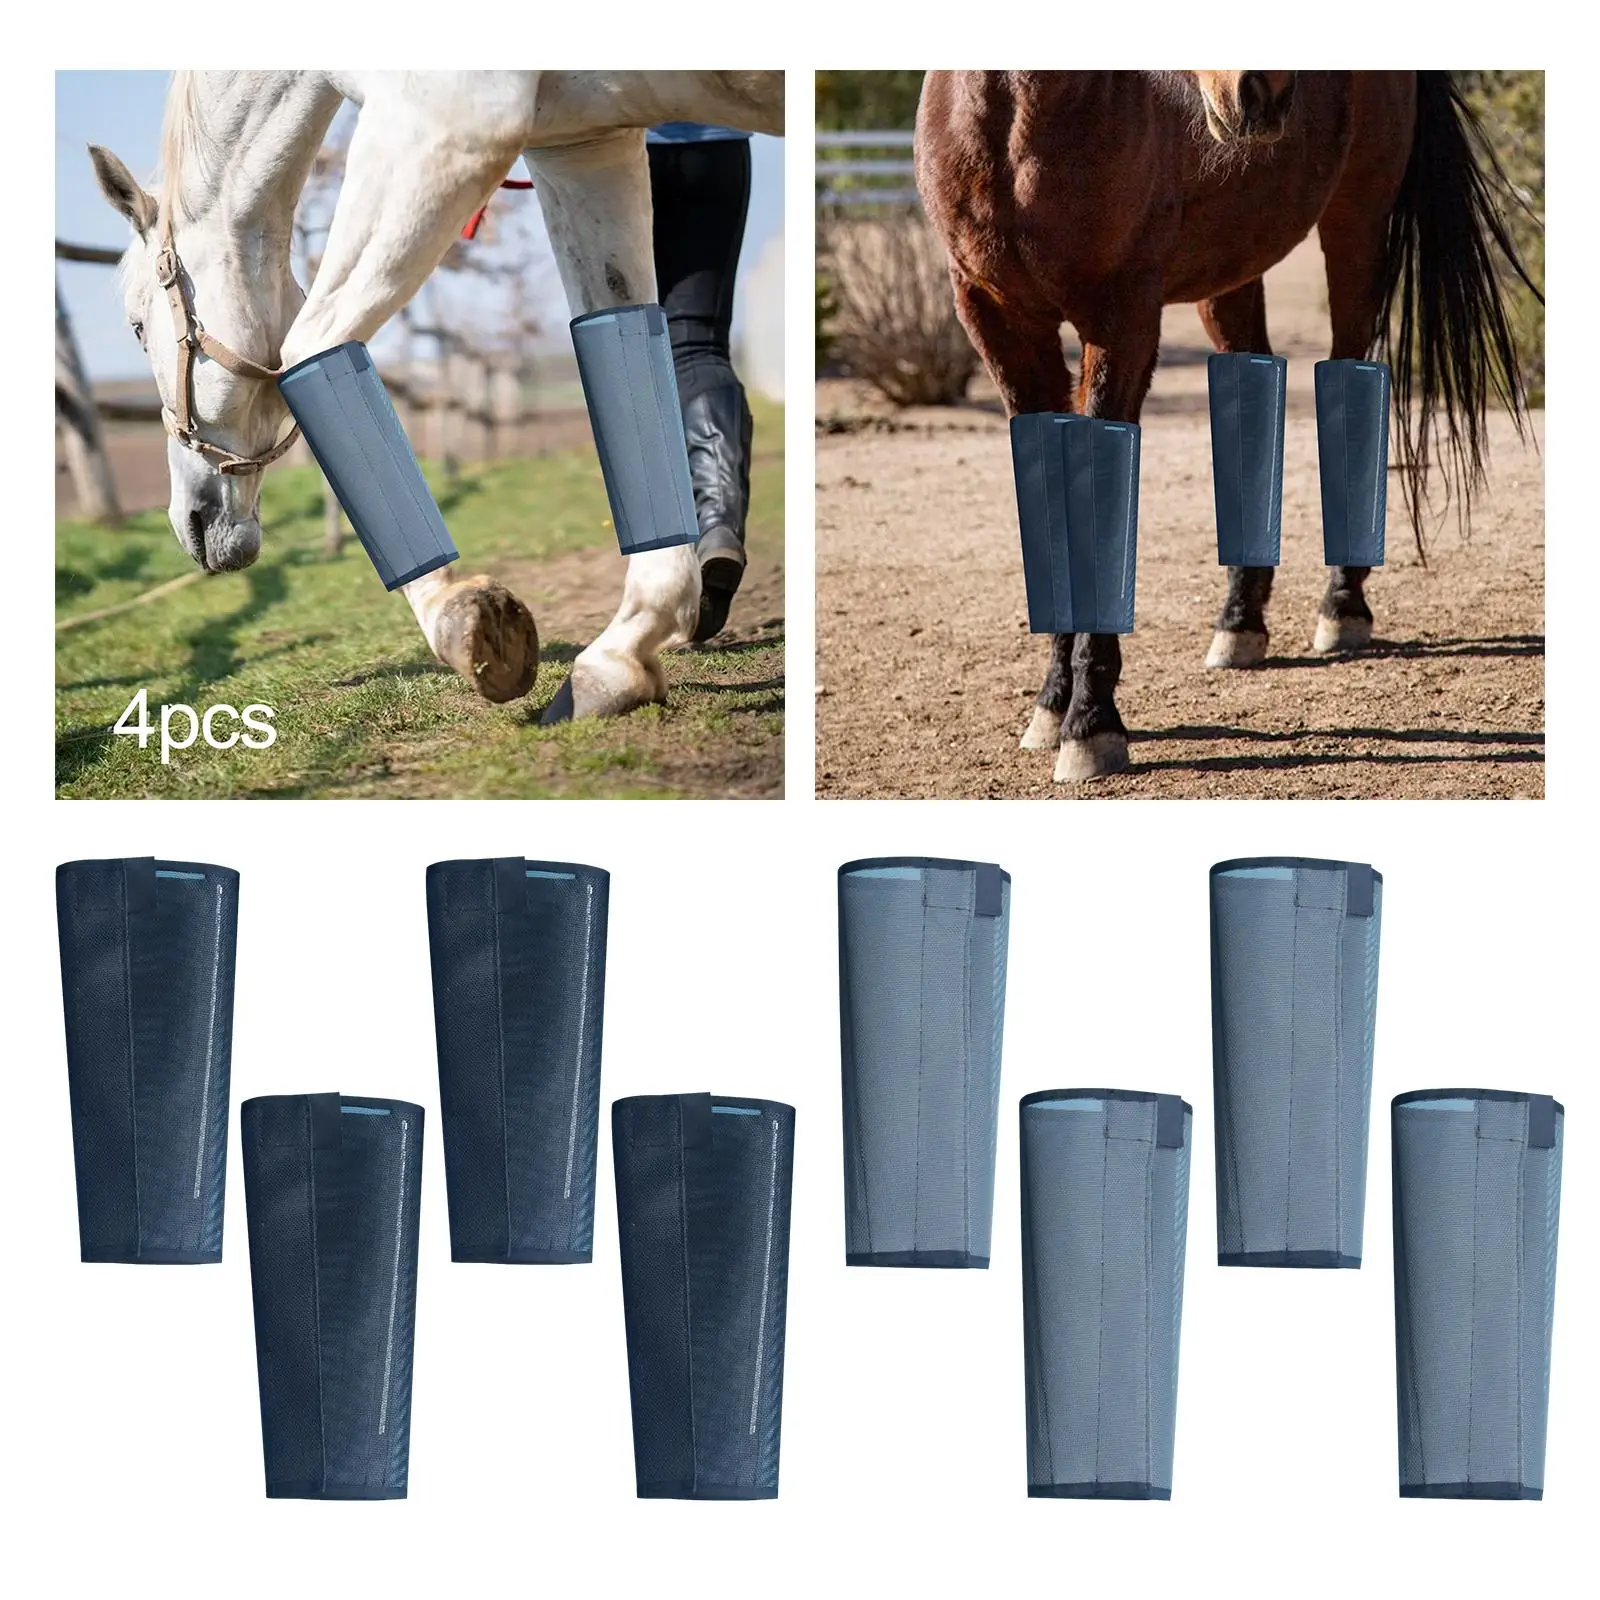 4x Horse Boots Mesh Jumping Comfortable Running Guard Equestrian Accessories